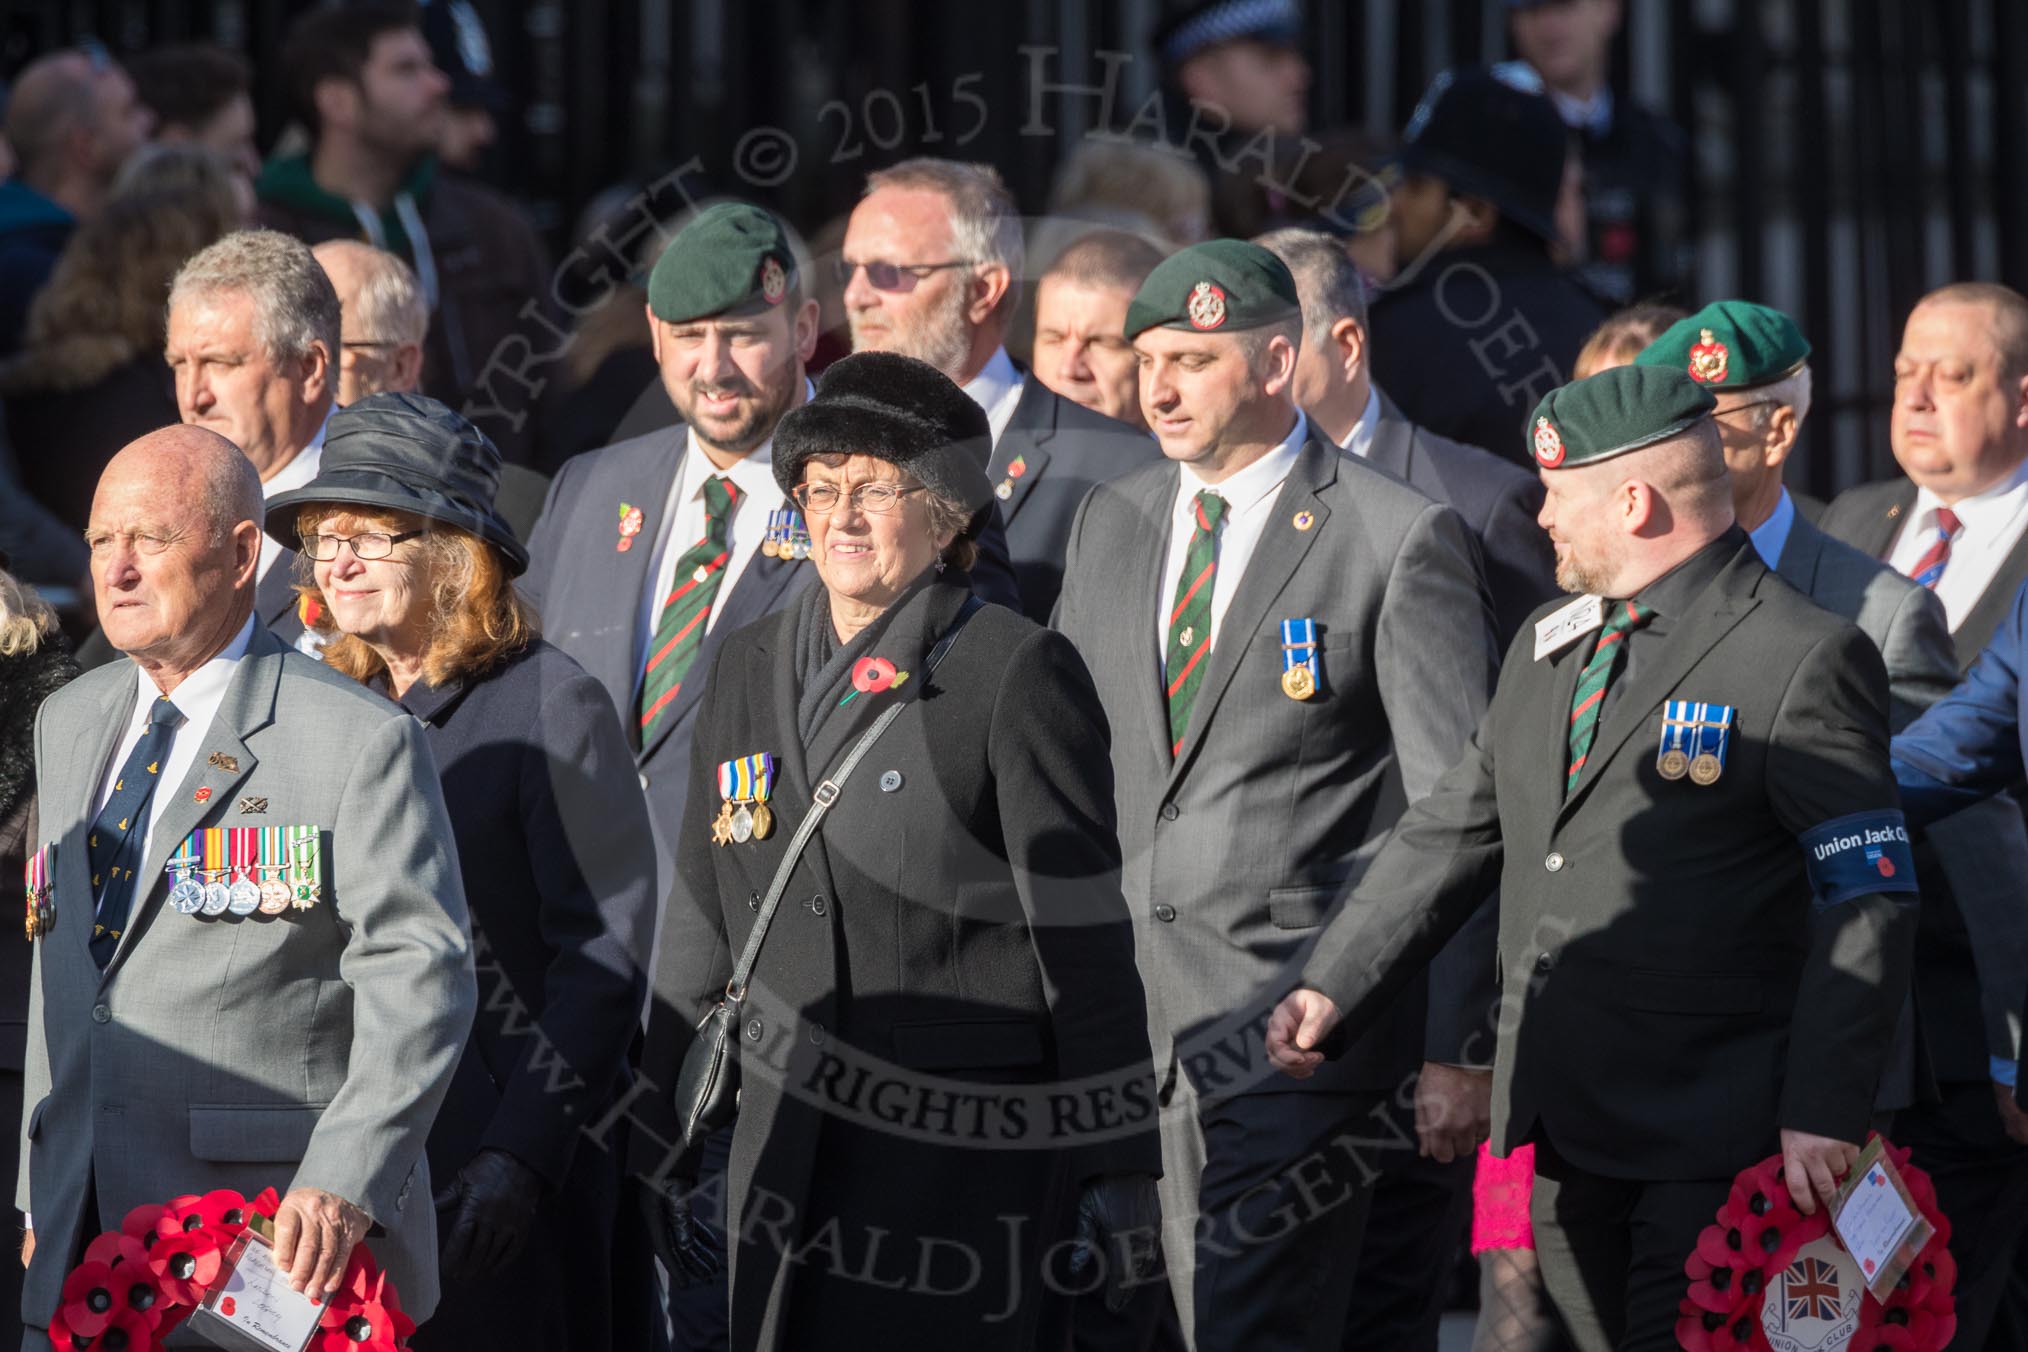 March Past, Remembrance Sunday at the Cenotaph 2016: M24 Union Jack Club.
Cenotaph, Whitehall, London SW1,
London,
Greater London,
United Kingdom,
on 13 November 2016 at 13:16, image #2700